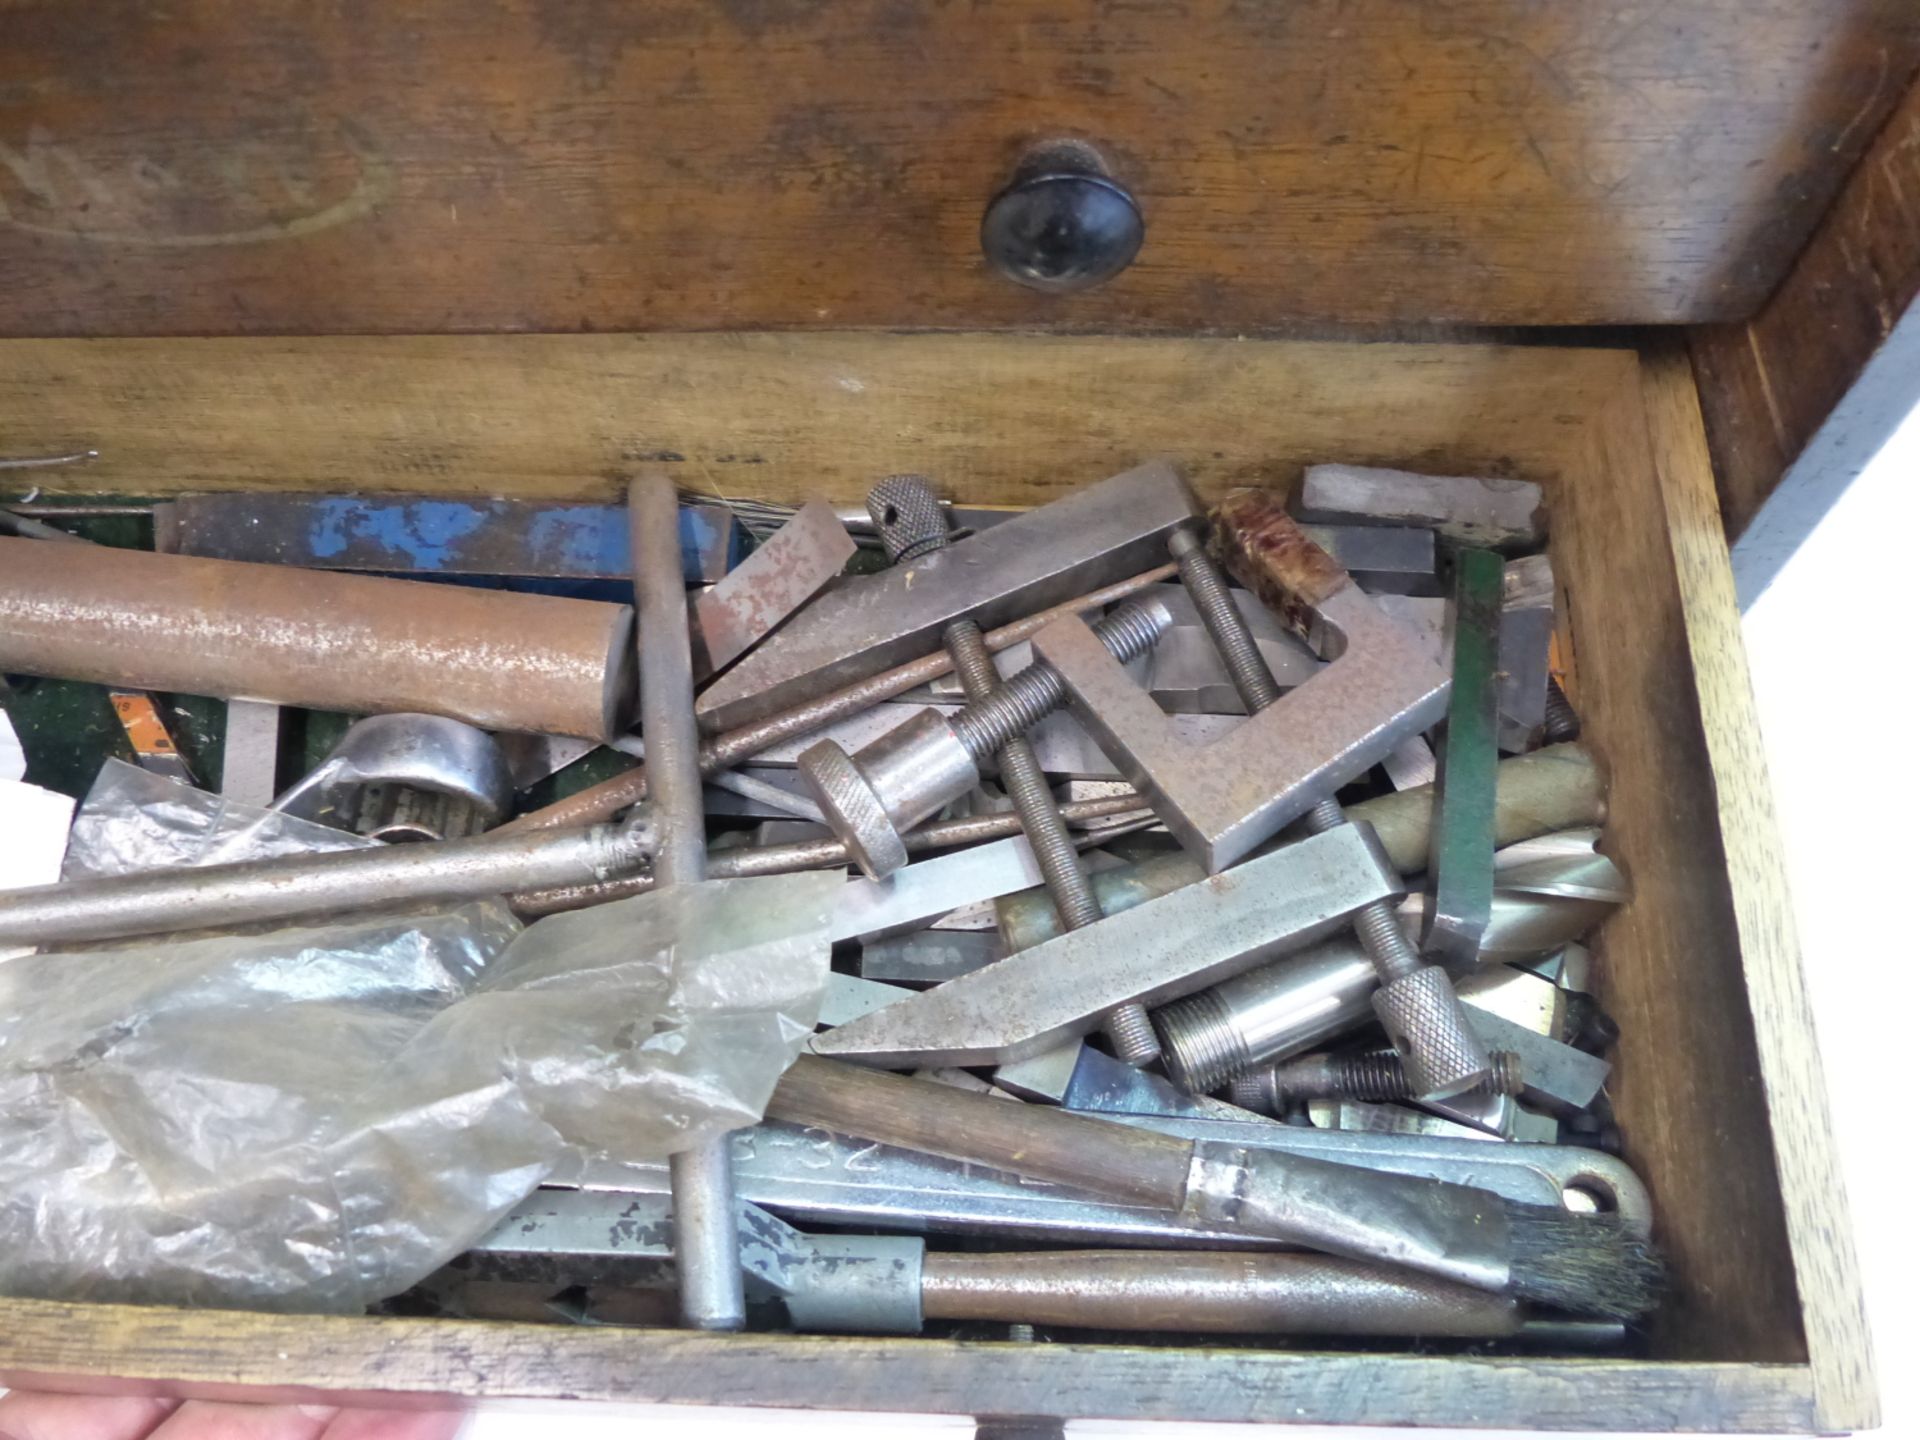 A VINTAGE WOODEN TOOL CHEST OF MULTIPLE DRAWERS, SOME CONTAINING MILLING AND OTHER TOOLS. - Image 4 of 6